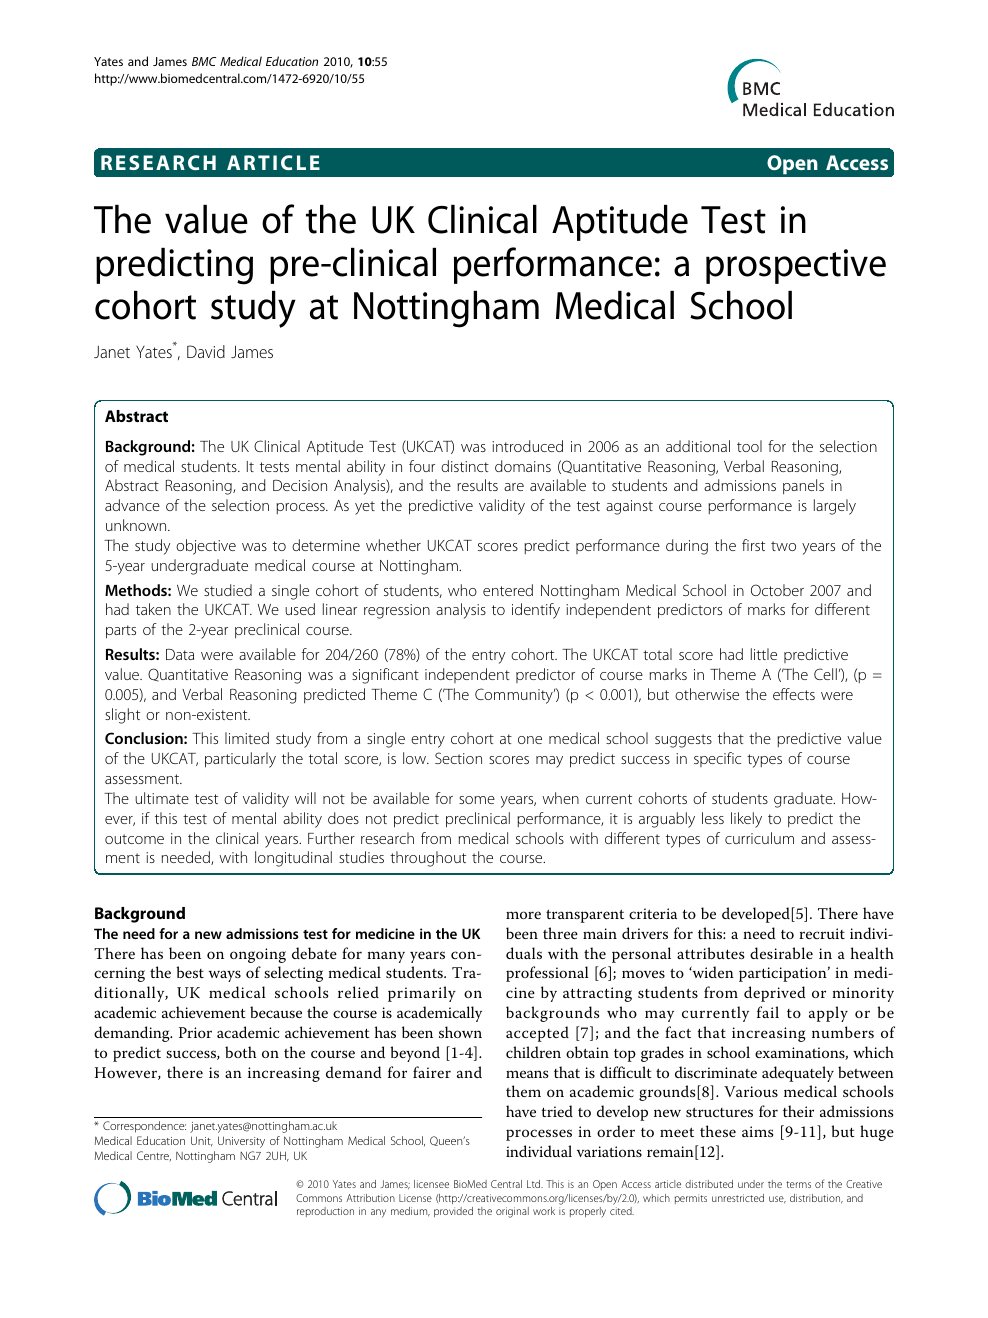 The value of the UK Clinical Aptitude Test in predicting pre-clinical performance a prospective cohort study at Nottingham Medical School image